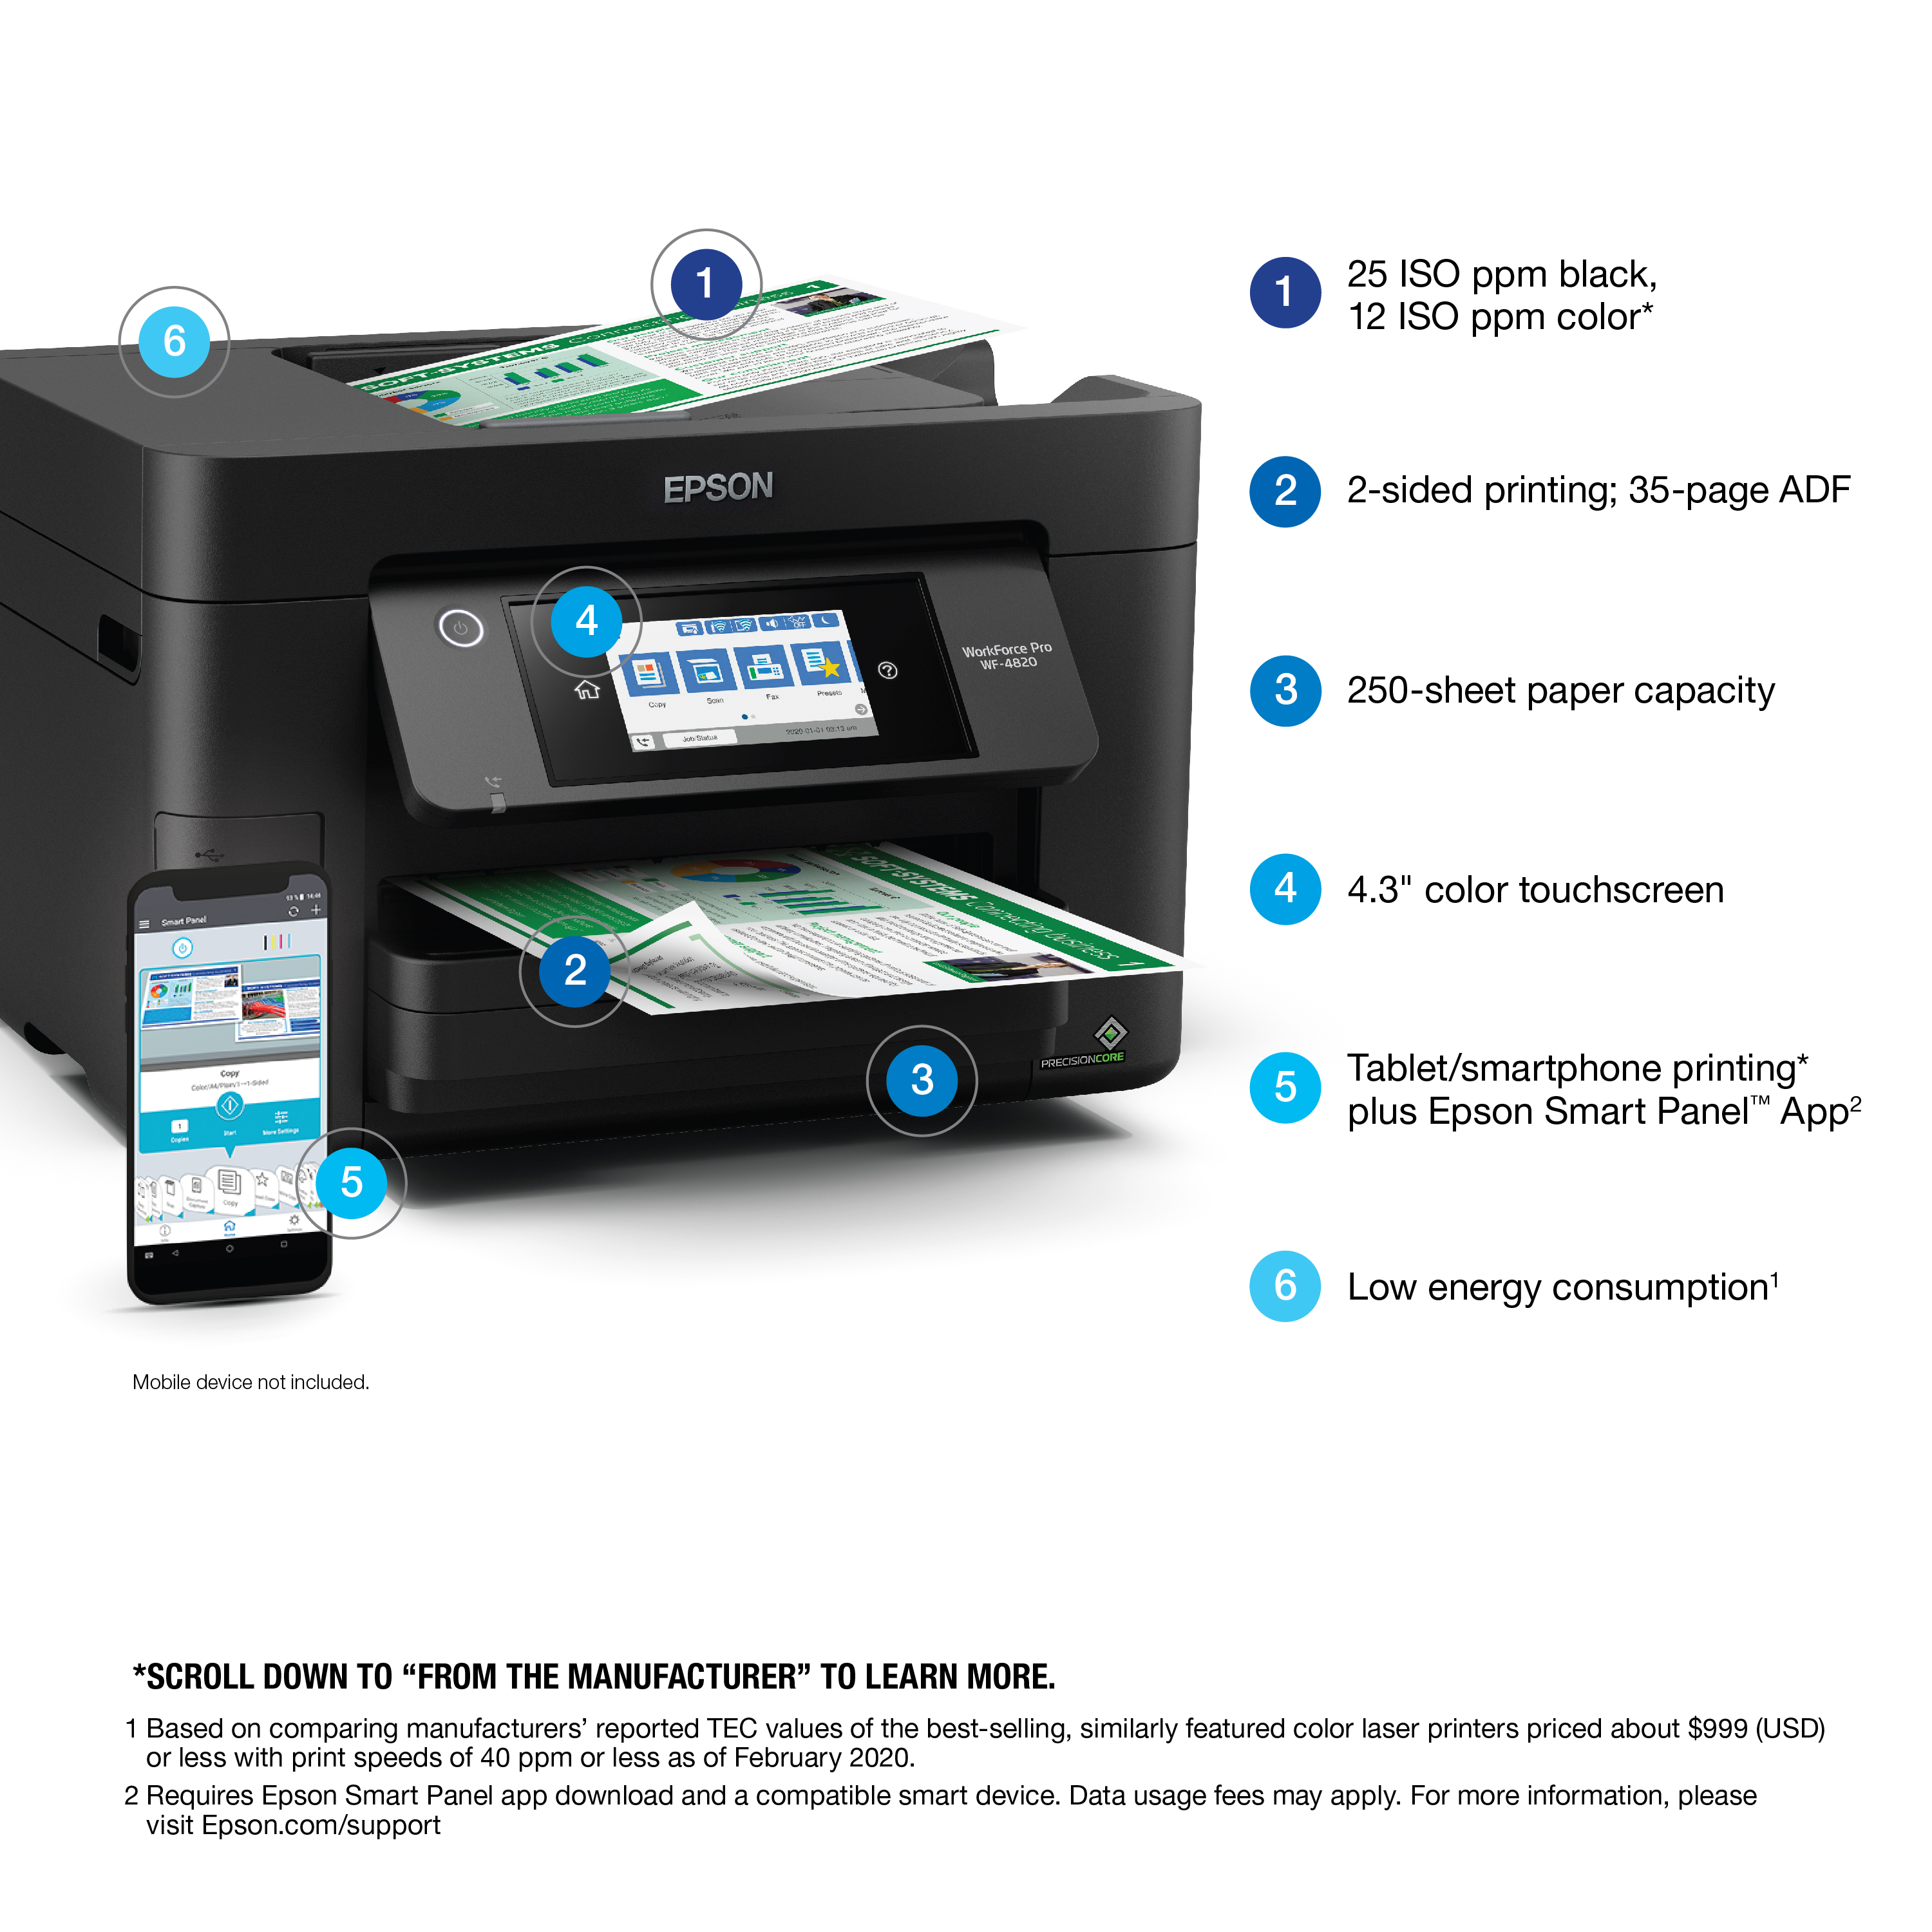 Epson WorkForce Pro WF-4820 Wireless All-in-One Printer with Auto 2-sided Printing, 35-page ADF, 250-sheet Paper Tray and 4.3" Color Touchscreen - image 4 of 6